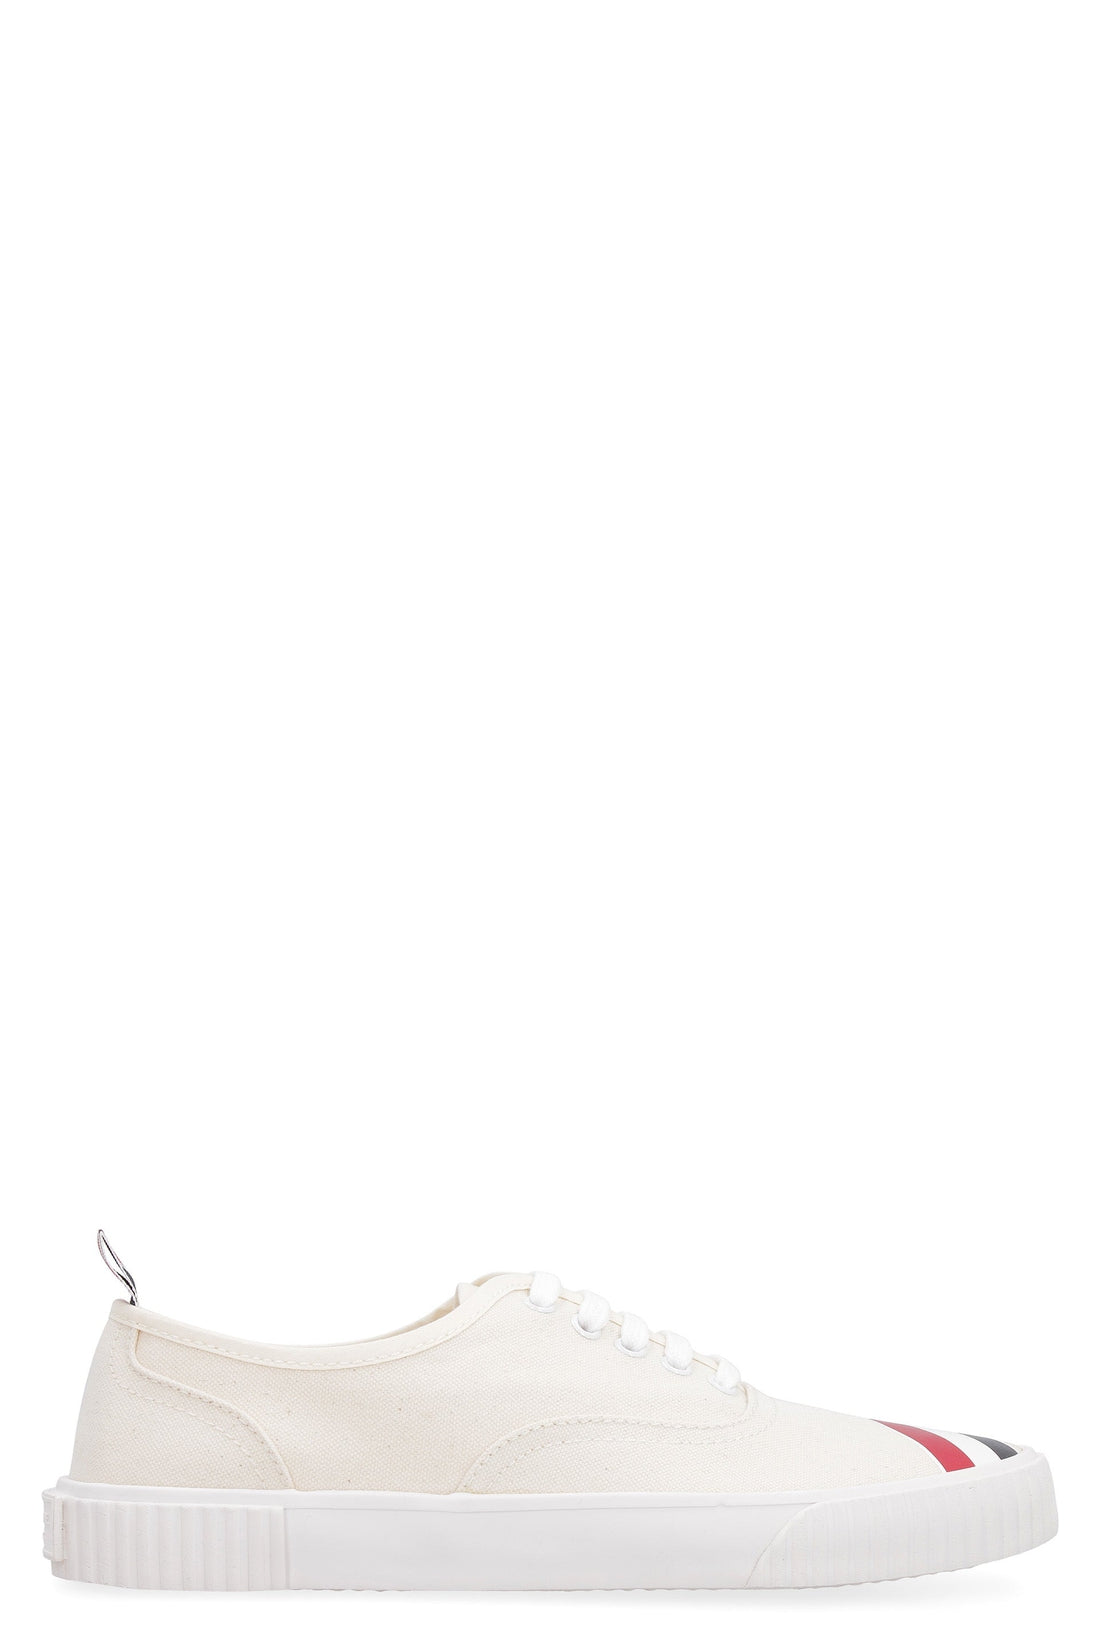 Thom Browne-OUTLET-SALE-Heritage canvas sneakers-ARCHIVIST